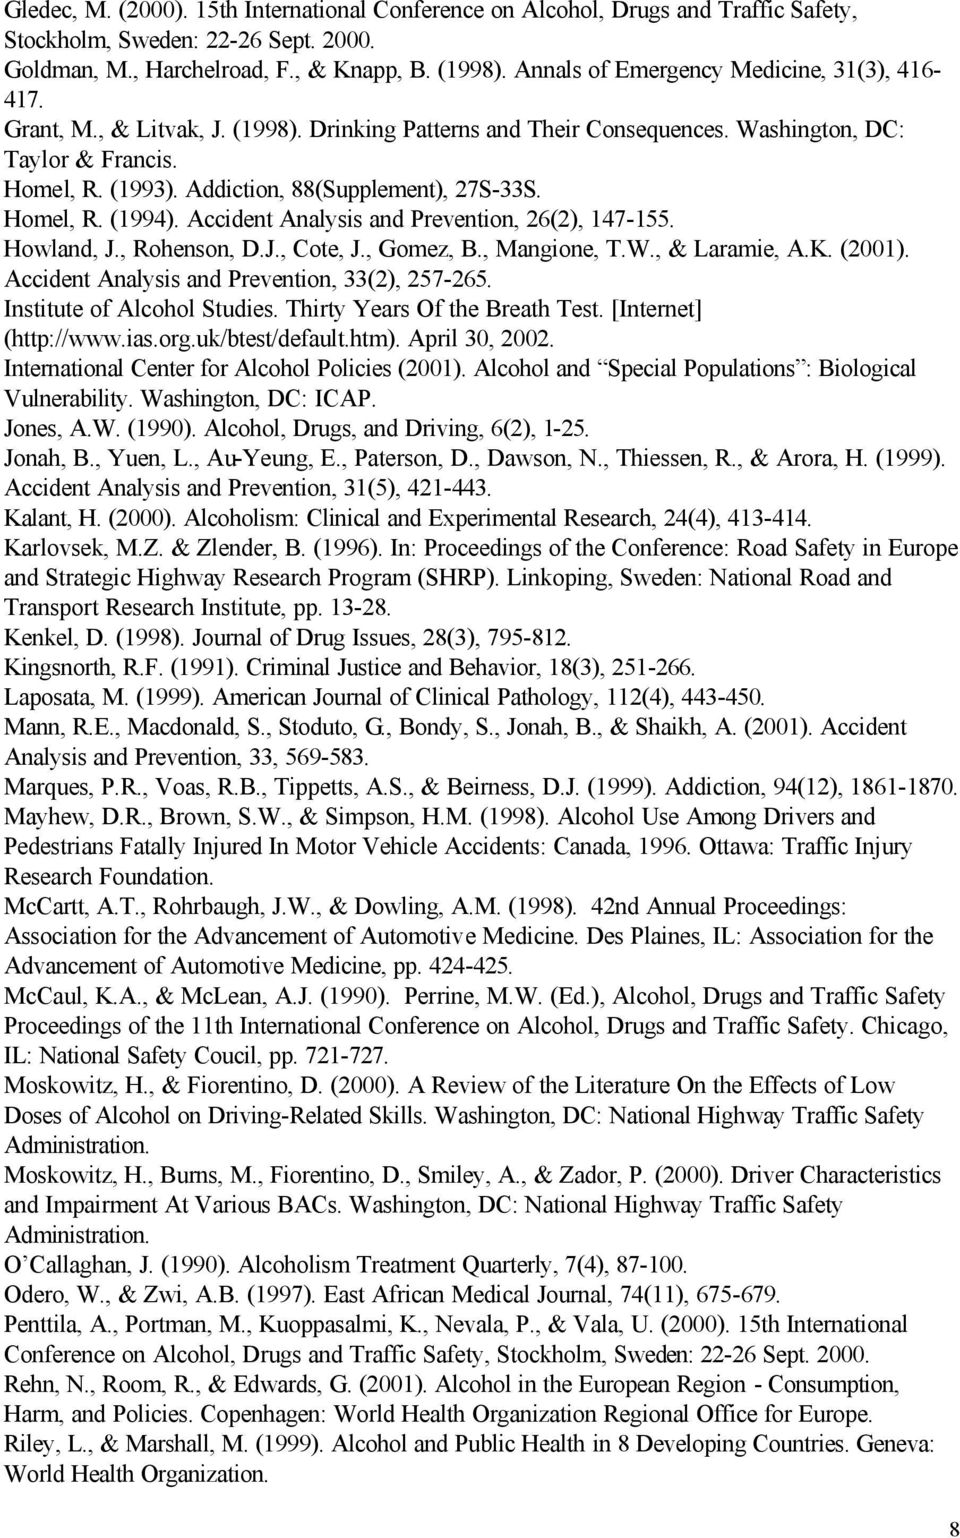 Addiction, 88(Supplement), 27S-33S. Homel, R. (1994). Accident Analysis and Prevention, 26(2), 147-155. Howland, J., Rohenson, D.J., Cote, J., Gomez, B., Mangione, T.W., & Laramie, A.K. (2001).